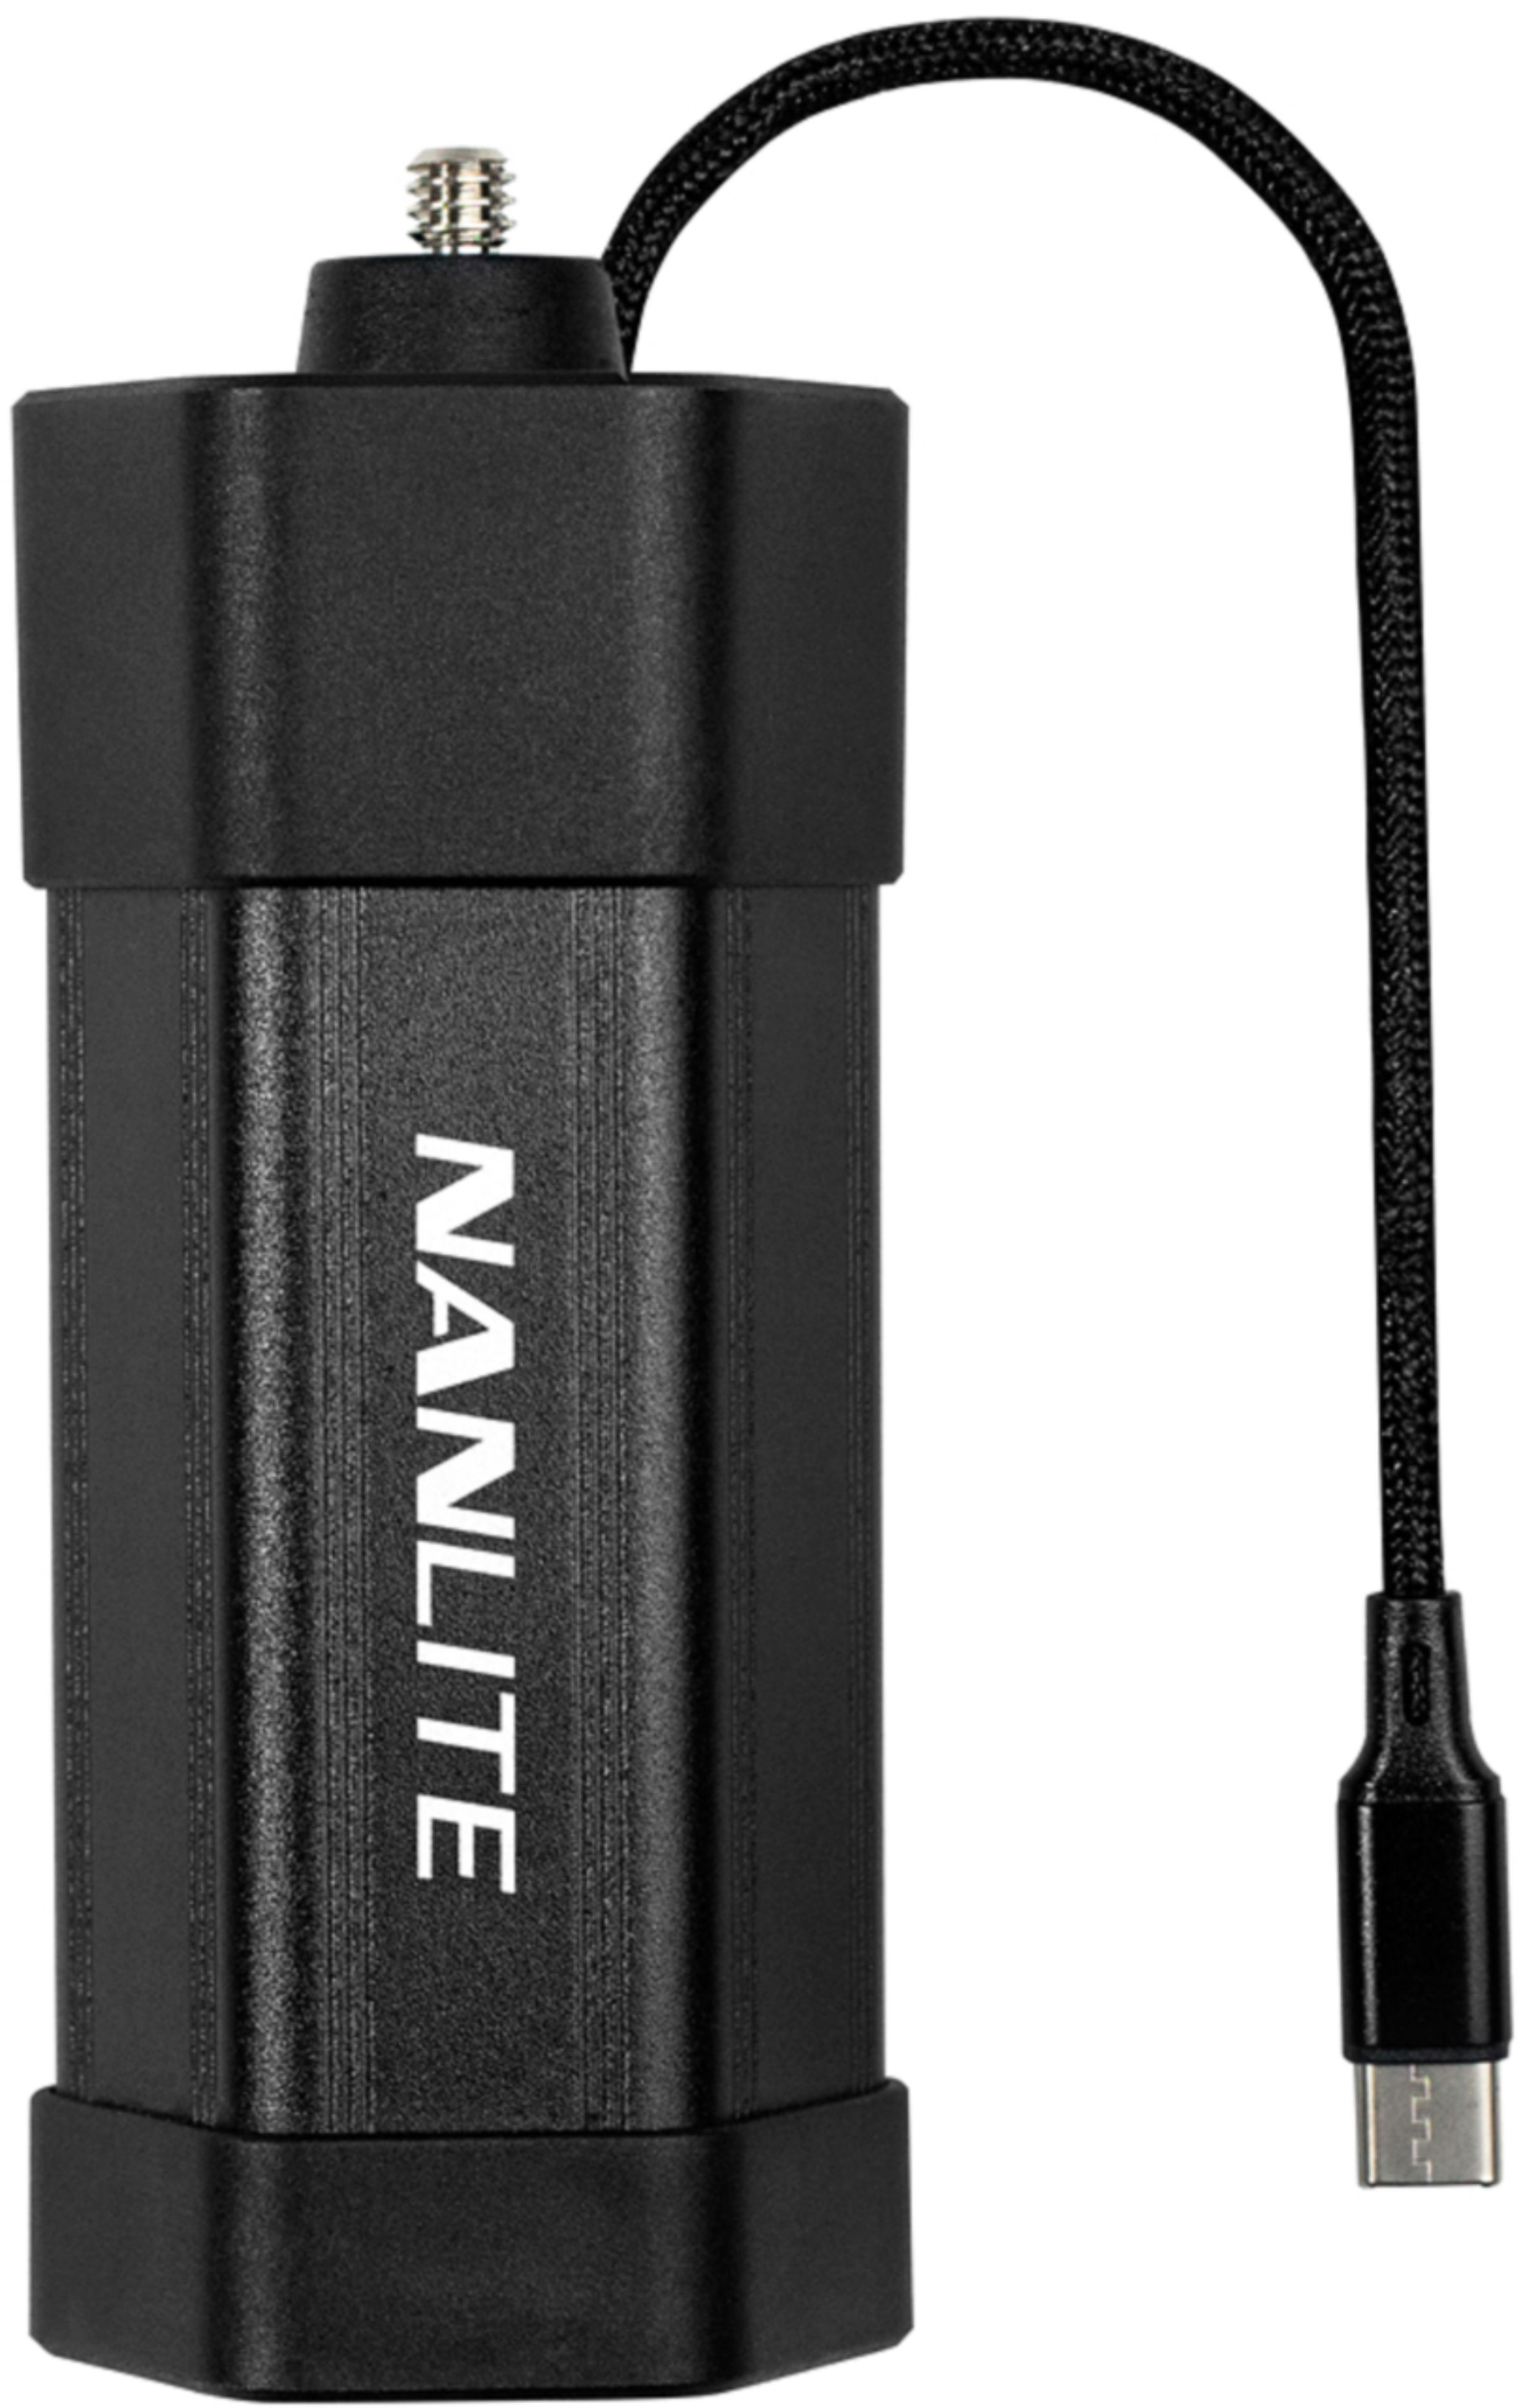 6949987422105 - NANLITE PAVOTUBE II 6C NP-F BATTERY GRIP WITH USB-C CABLE